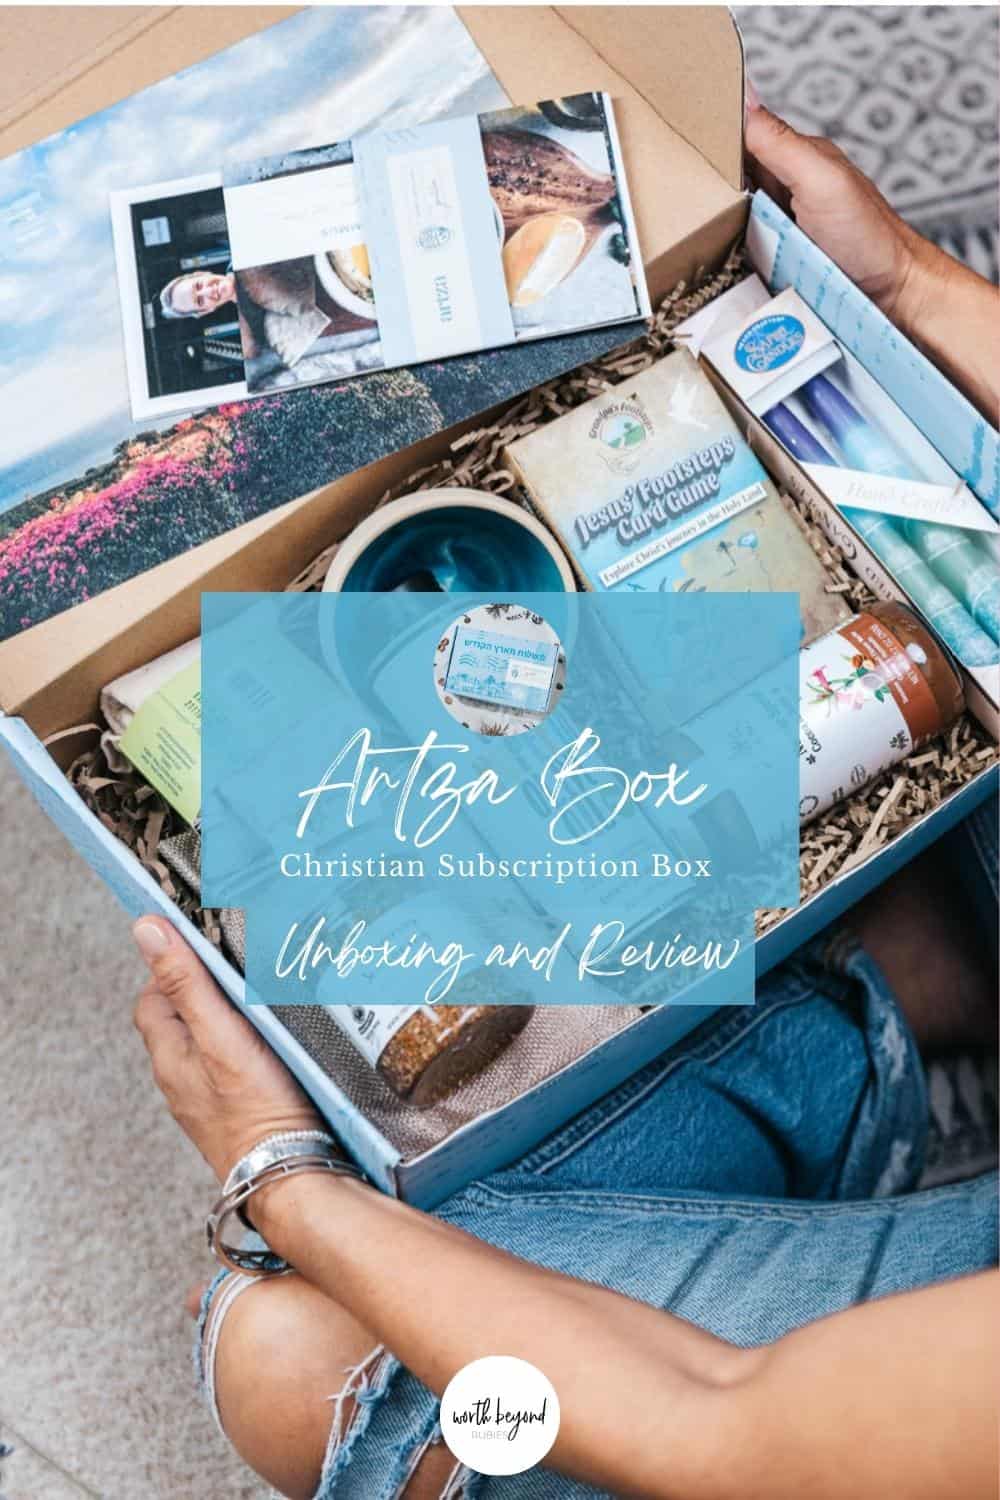 Artza Box Subscription Box with text overlay that says Artza Box Christian Subscription Box Unboxing and Review